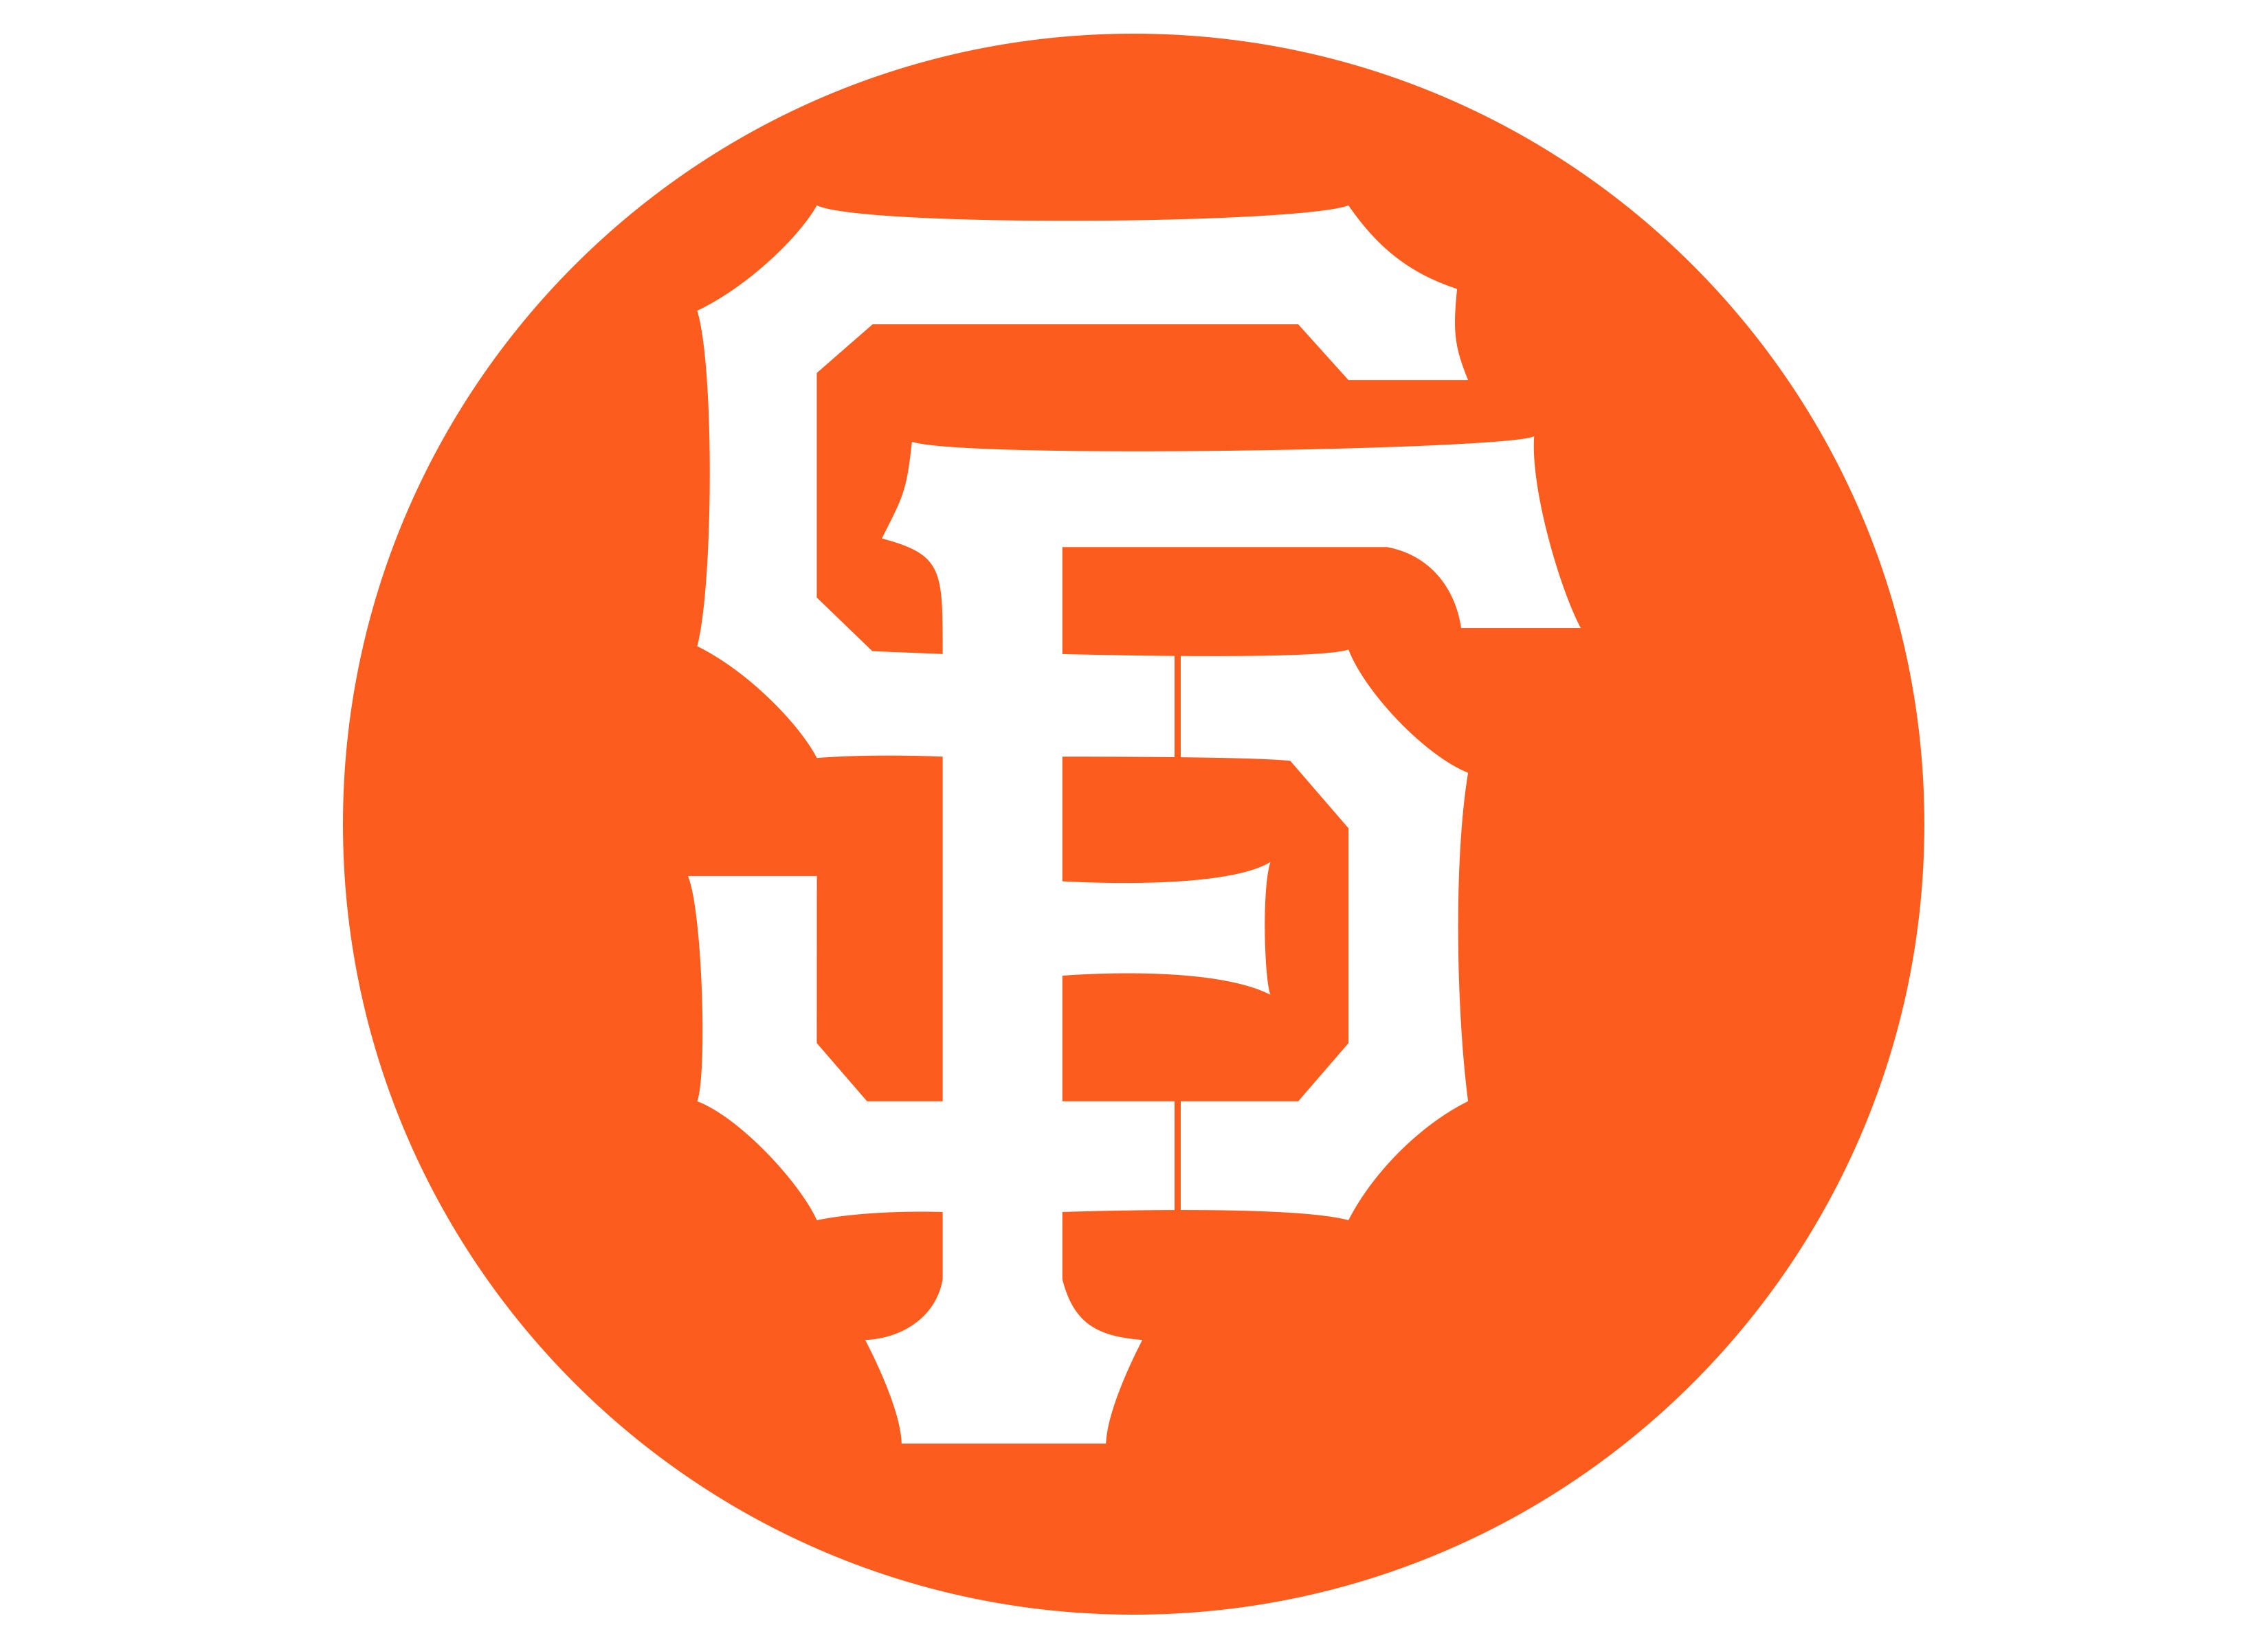 Sf Giants At T Seating Chart